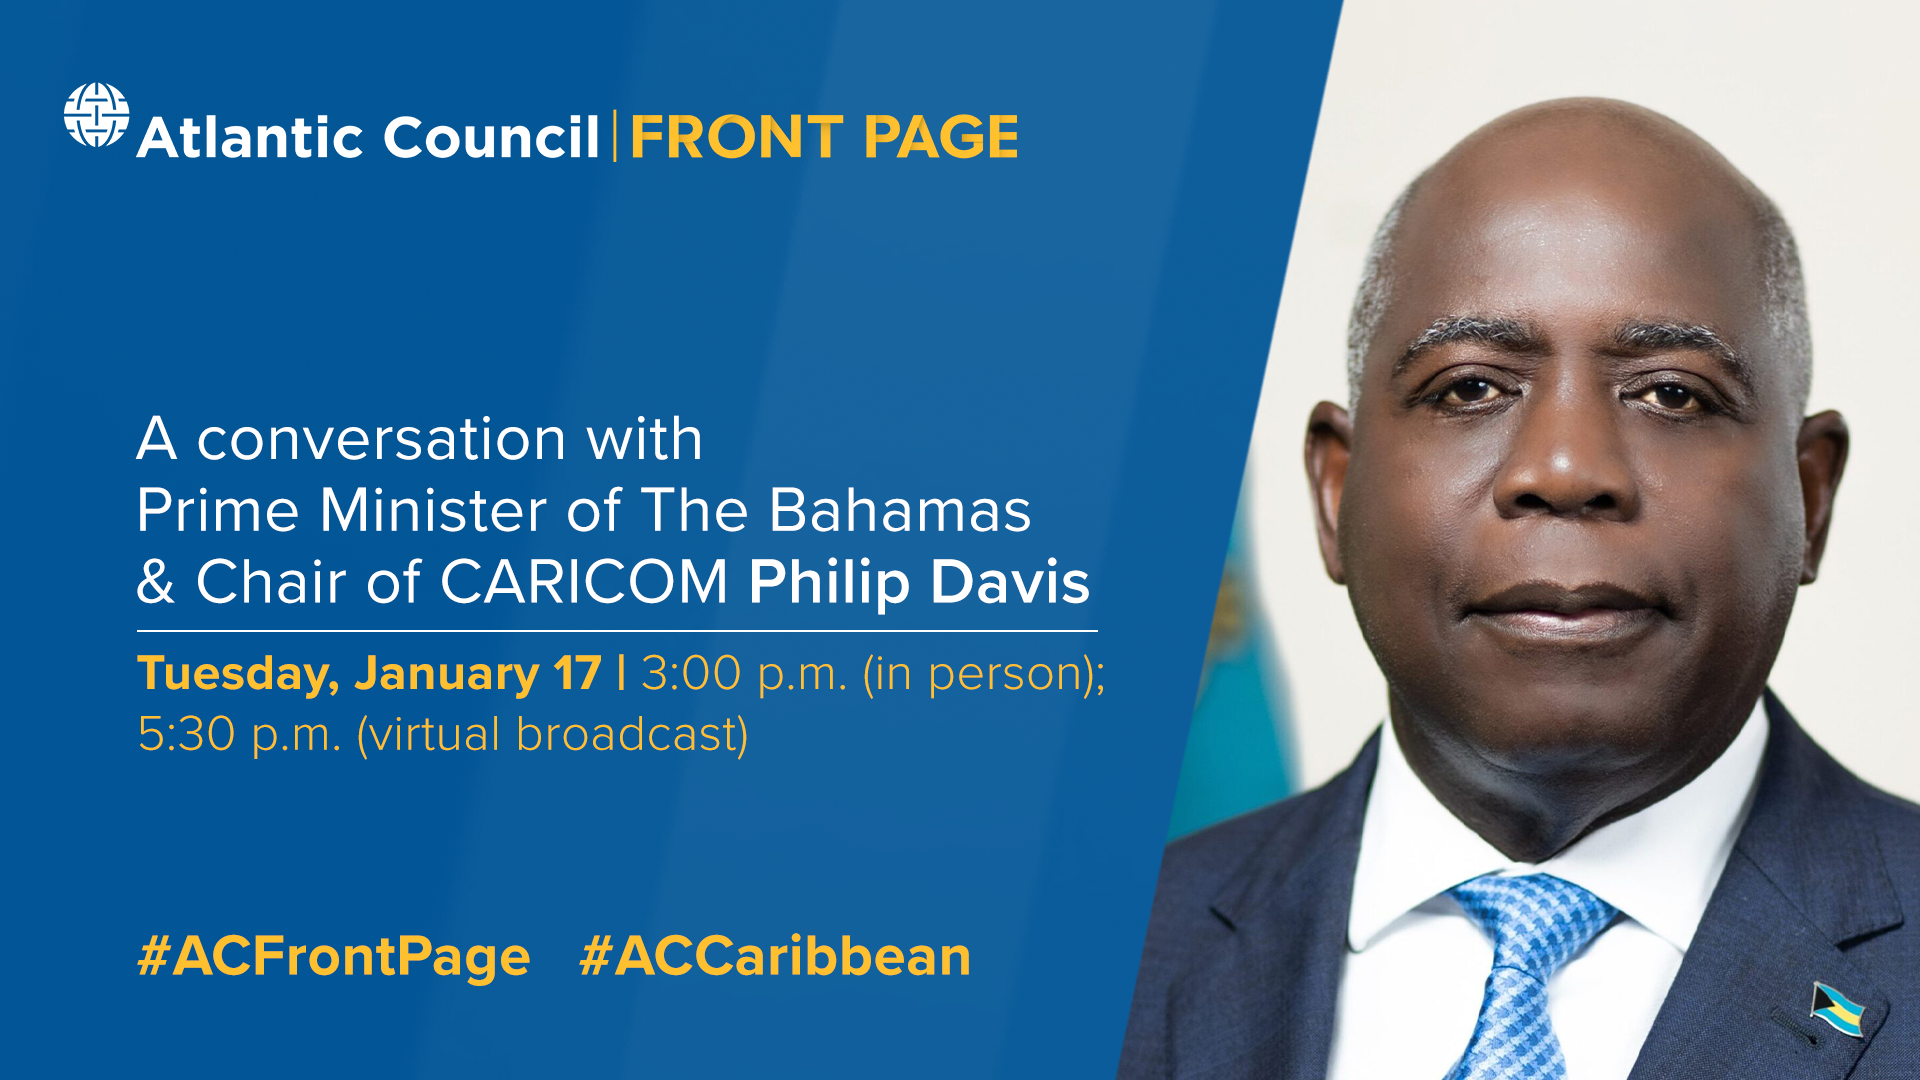 A conversation with Prime Minister of The Bahamas and Chair of